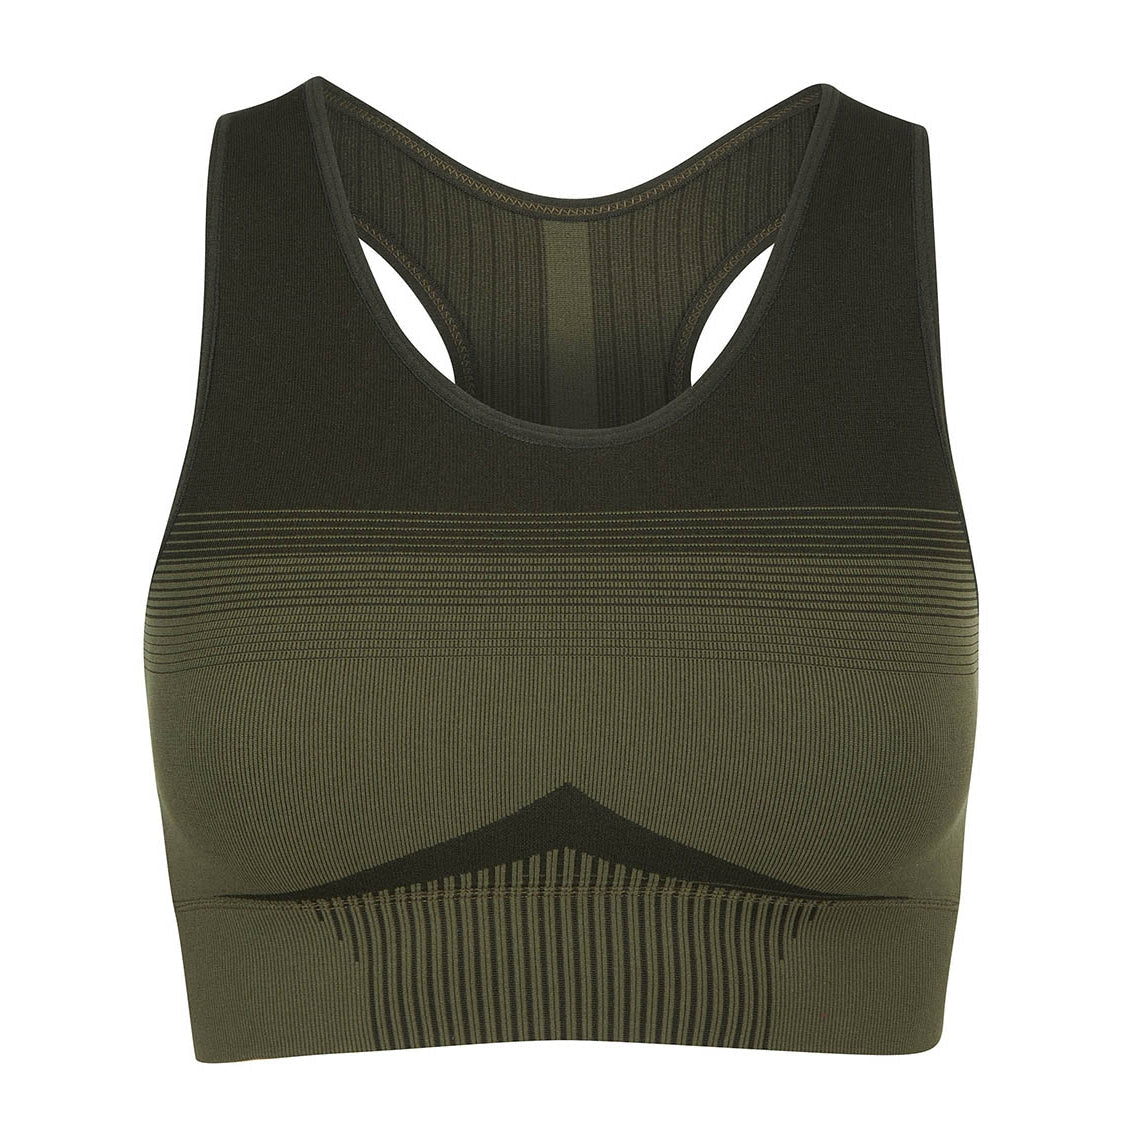 LeMieux Activewear Sports Bra-Southern Sport Horses-The Equestrian